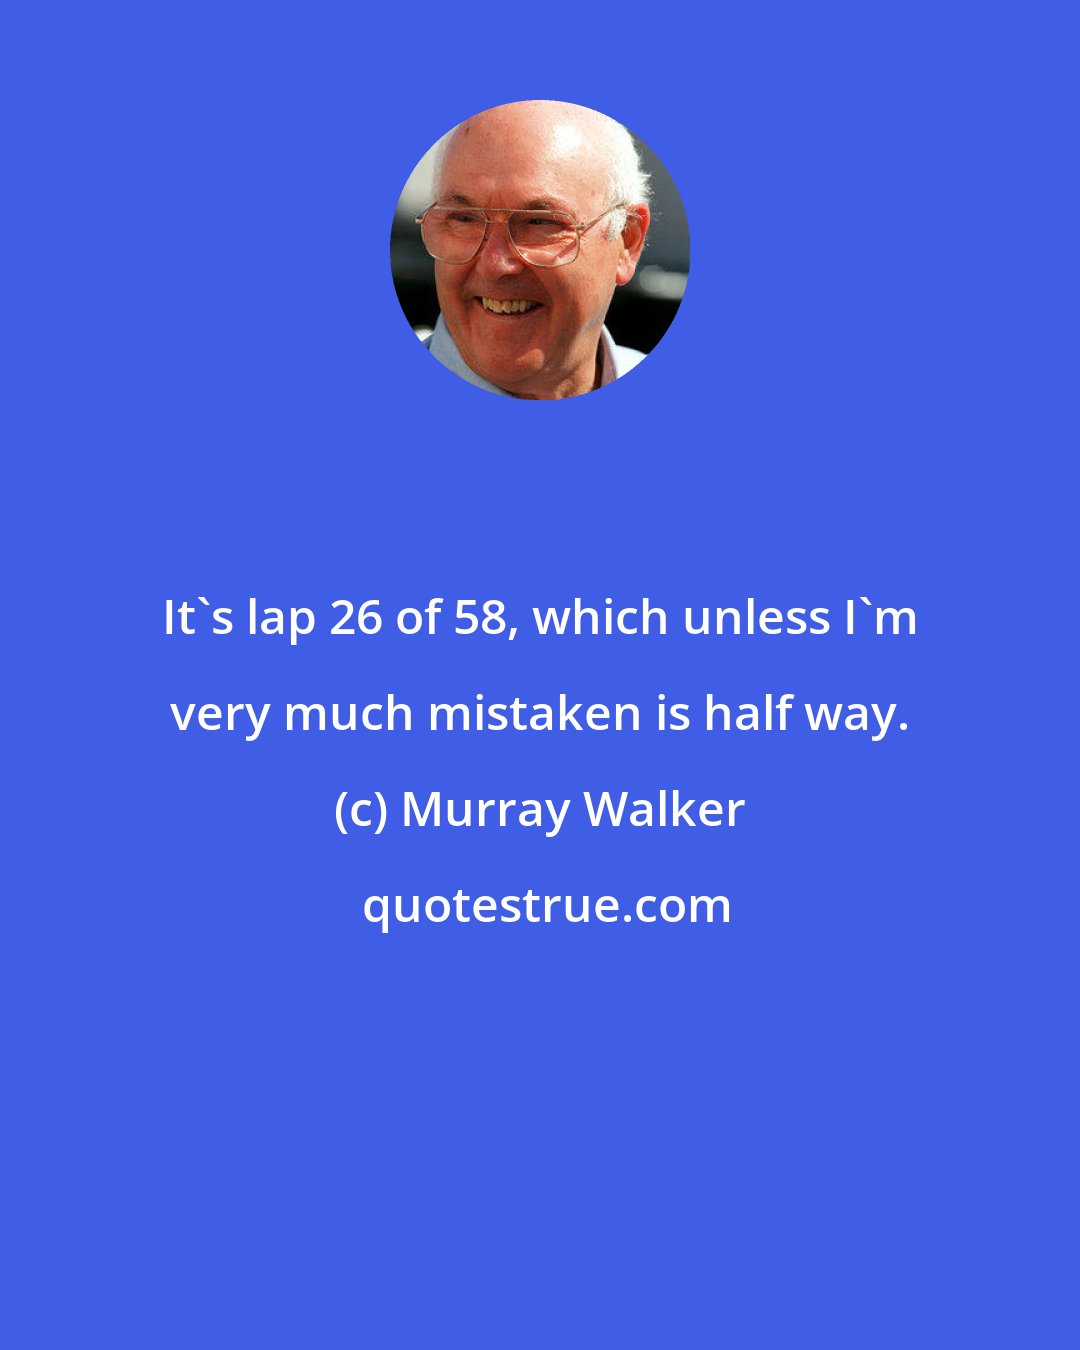 Murray Walker: It's lap 26 of 58, which unless I'm very much mistaken is half way.